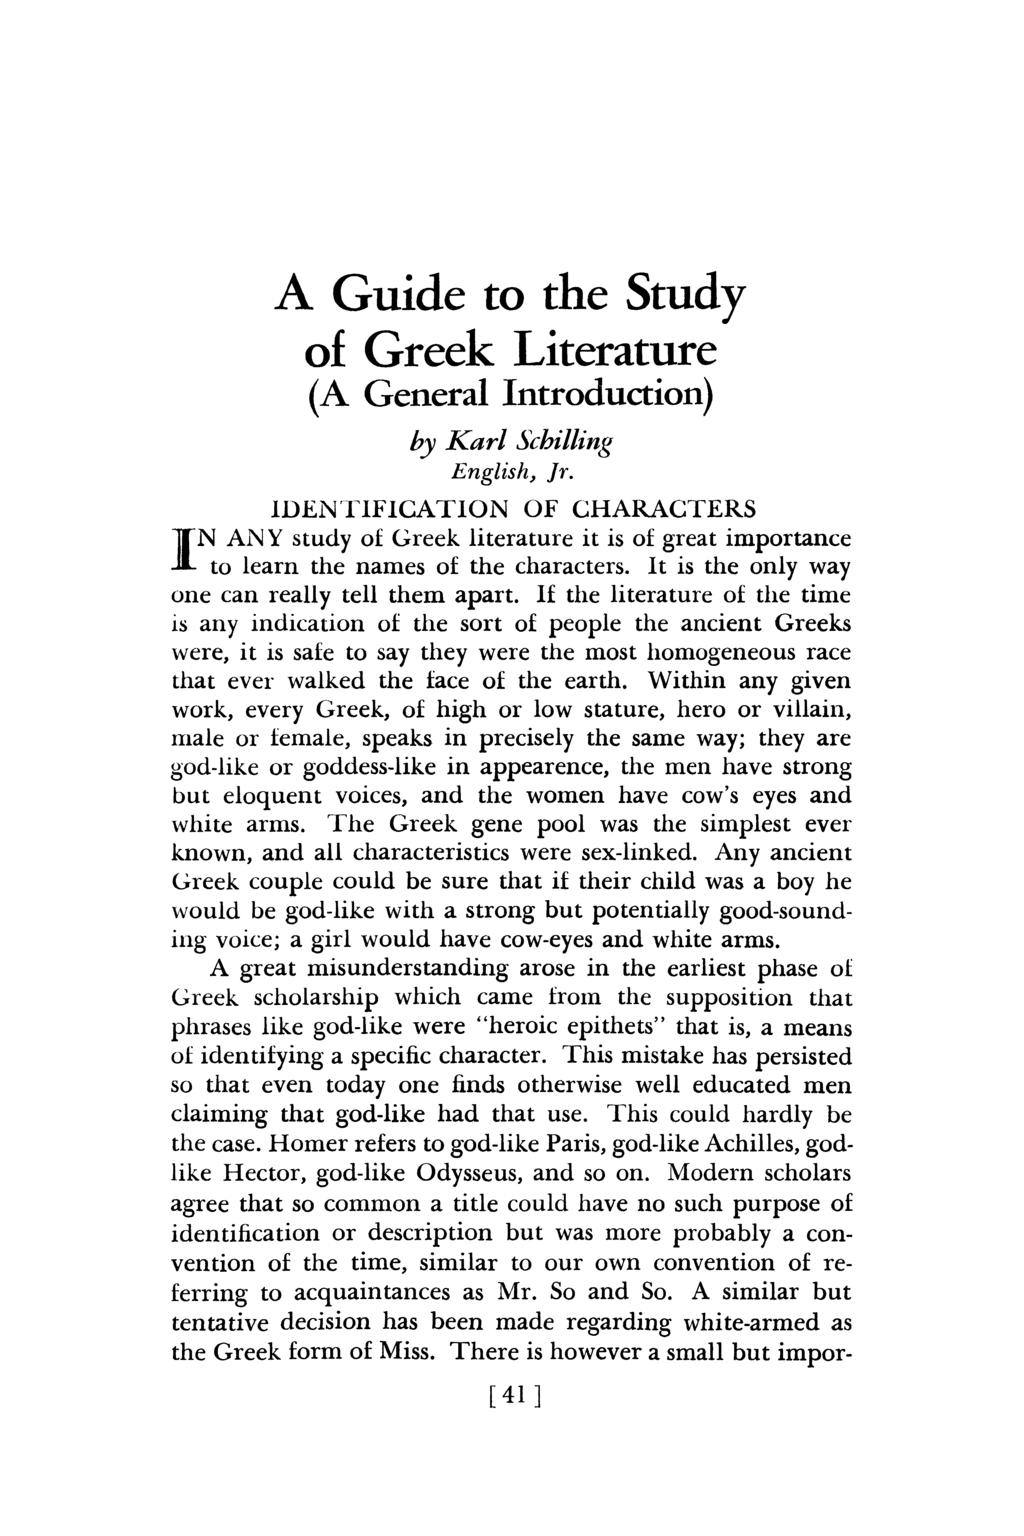 A Guide to the Study of Greek Literature (A General Introduction) by Karl Schilling English, Jr.